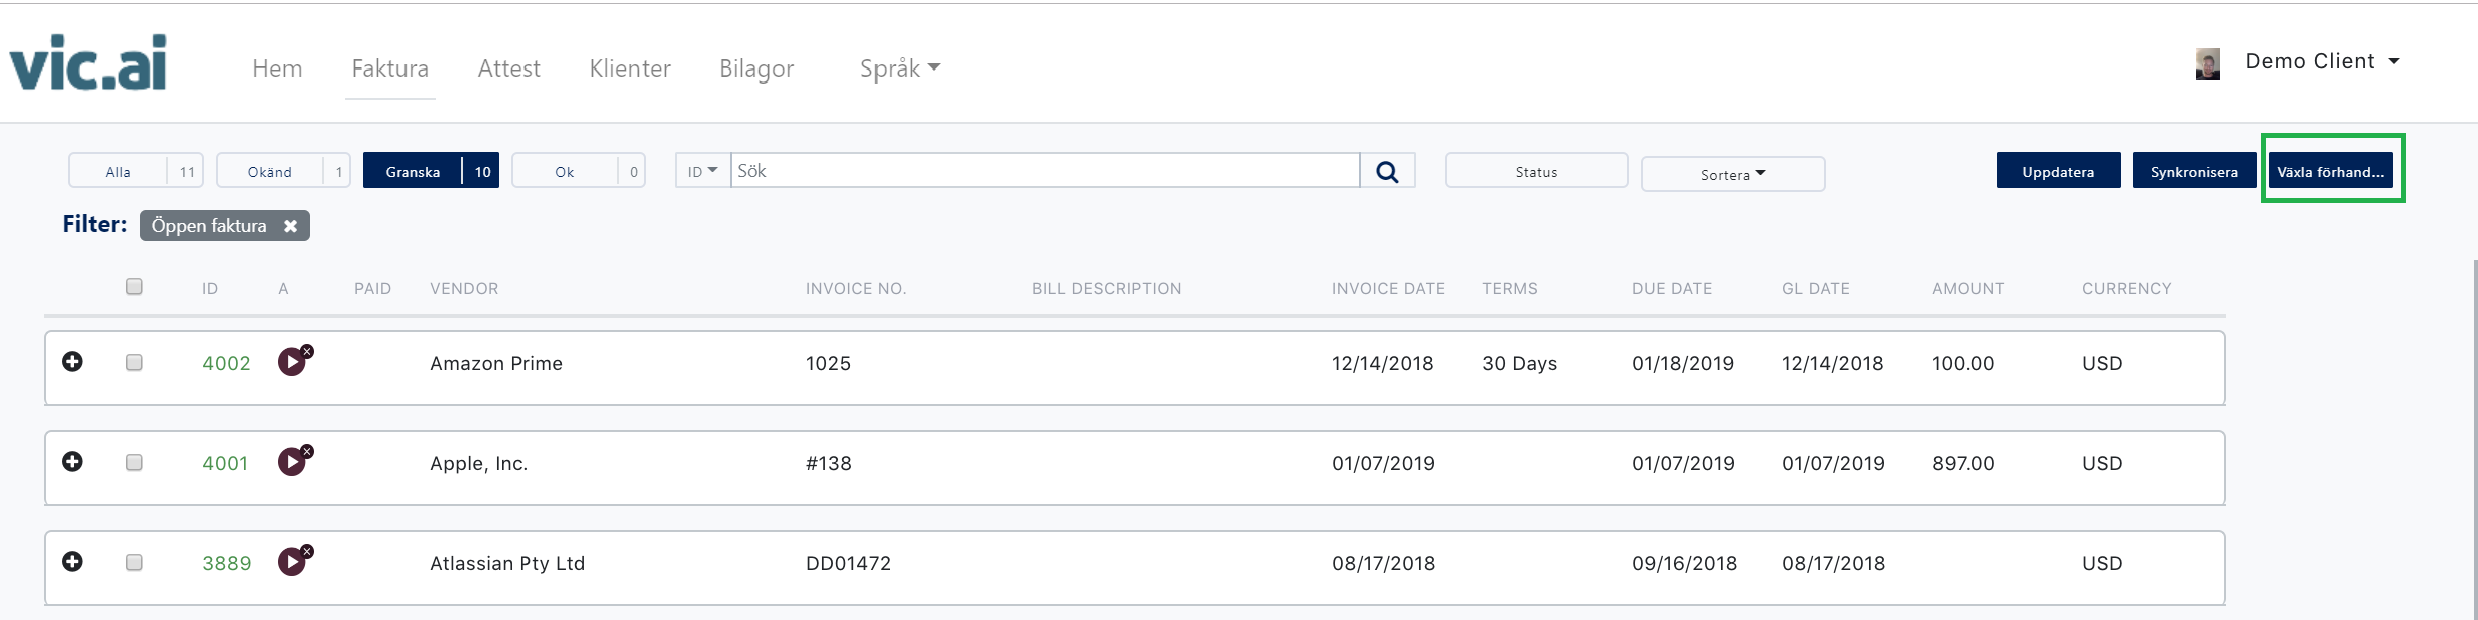 Vic_ai_Dashboard_Invoice_Overview_5.png